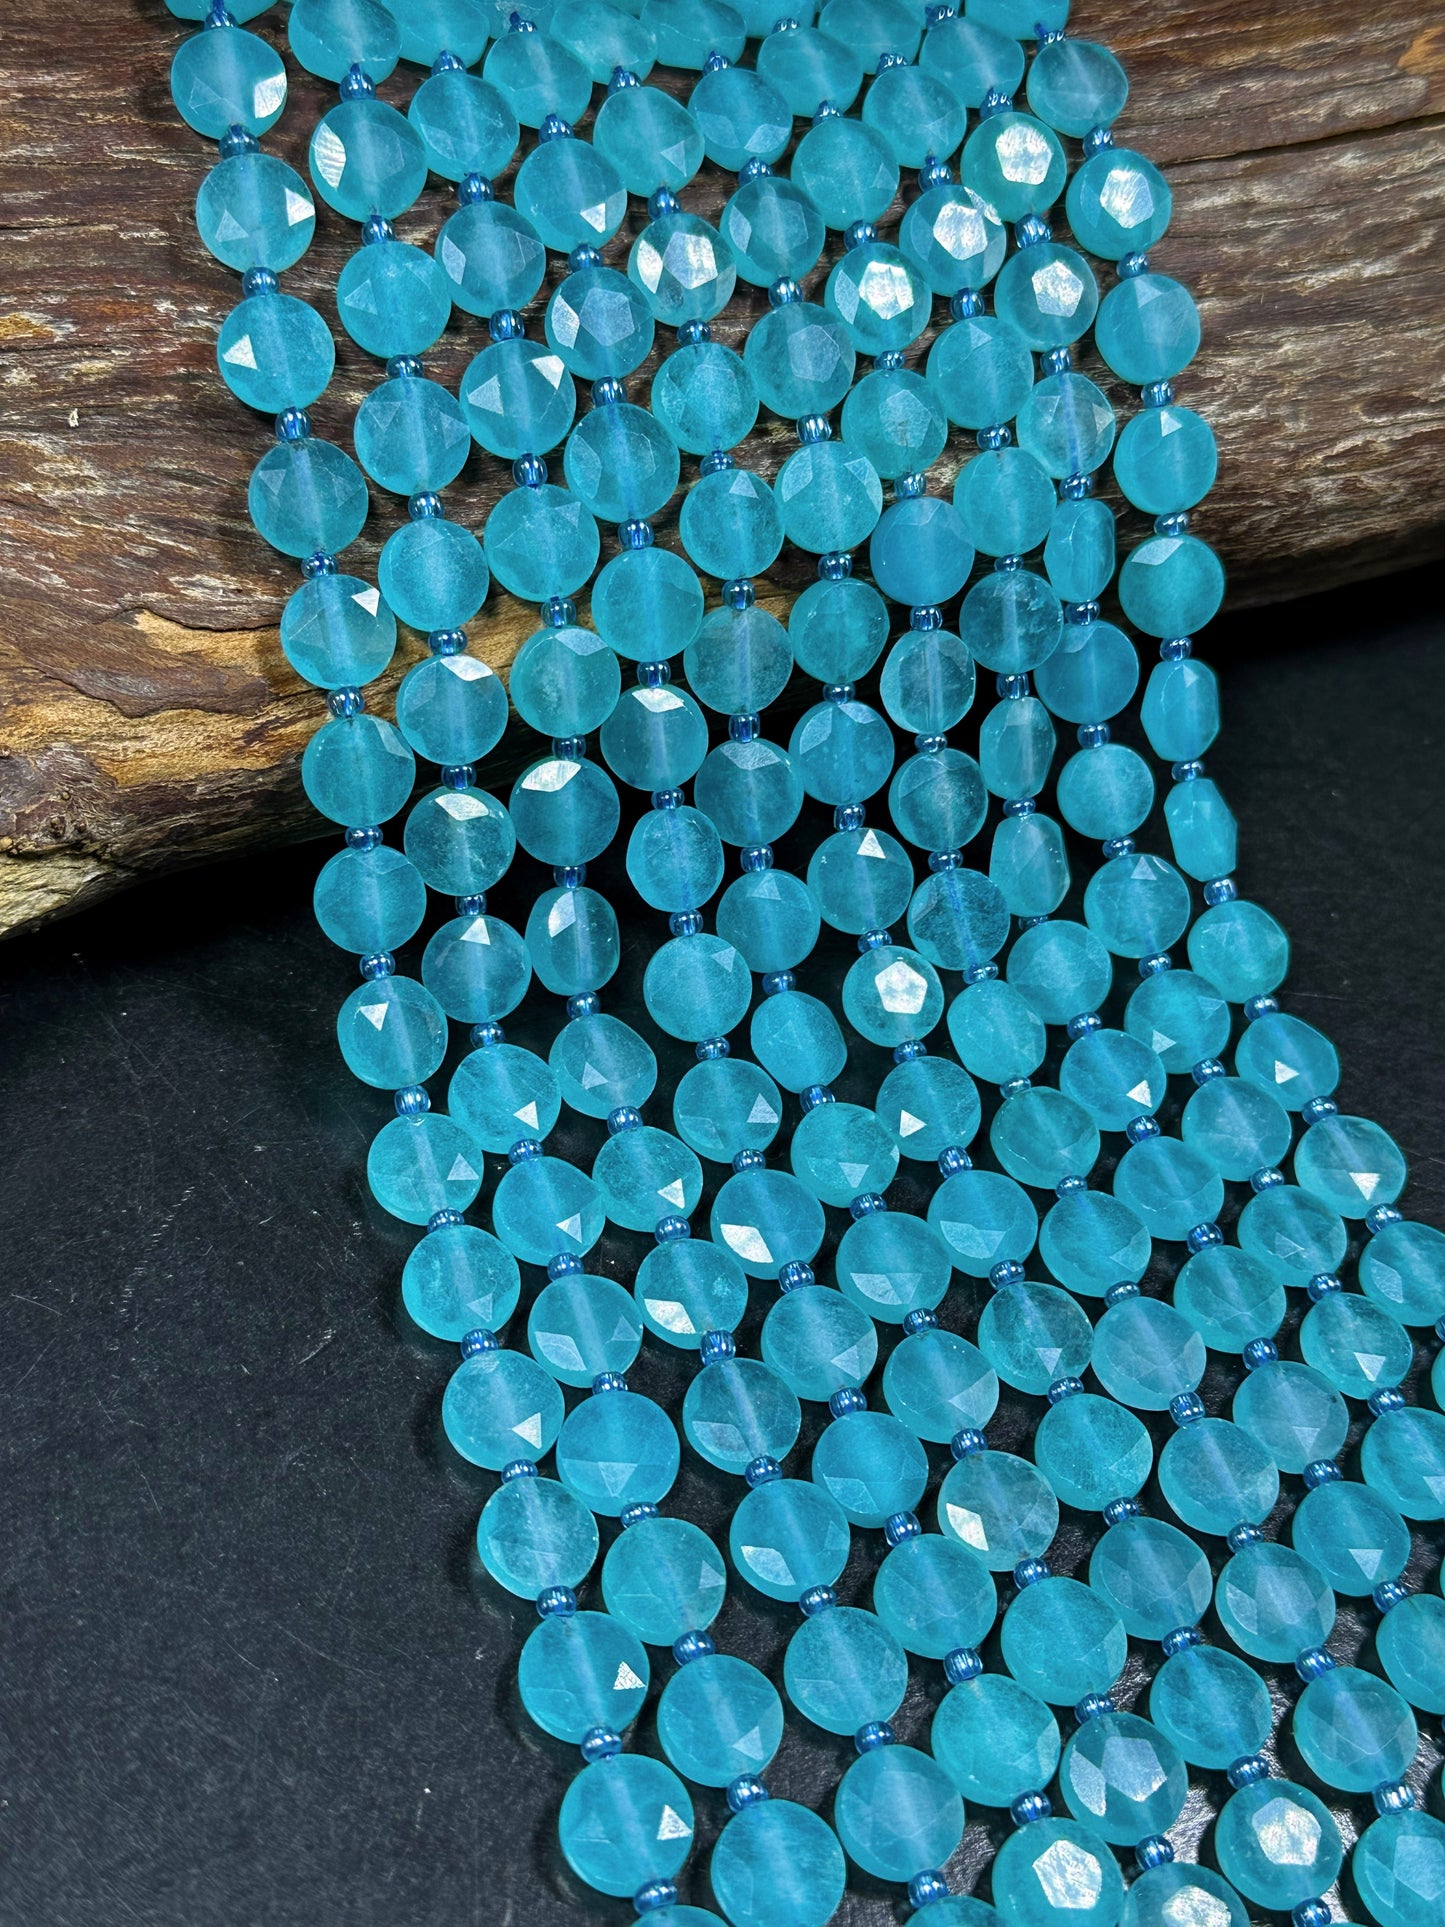 Natural Amazonite Gemstone Bead Faceted 10mm Coin Shape Bead, Beautiful Natural Blue Green Color Amazonite Beads, Great Quality 15.5" Strand